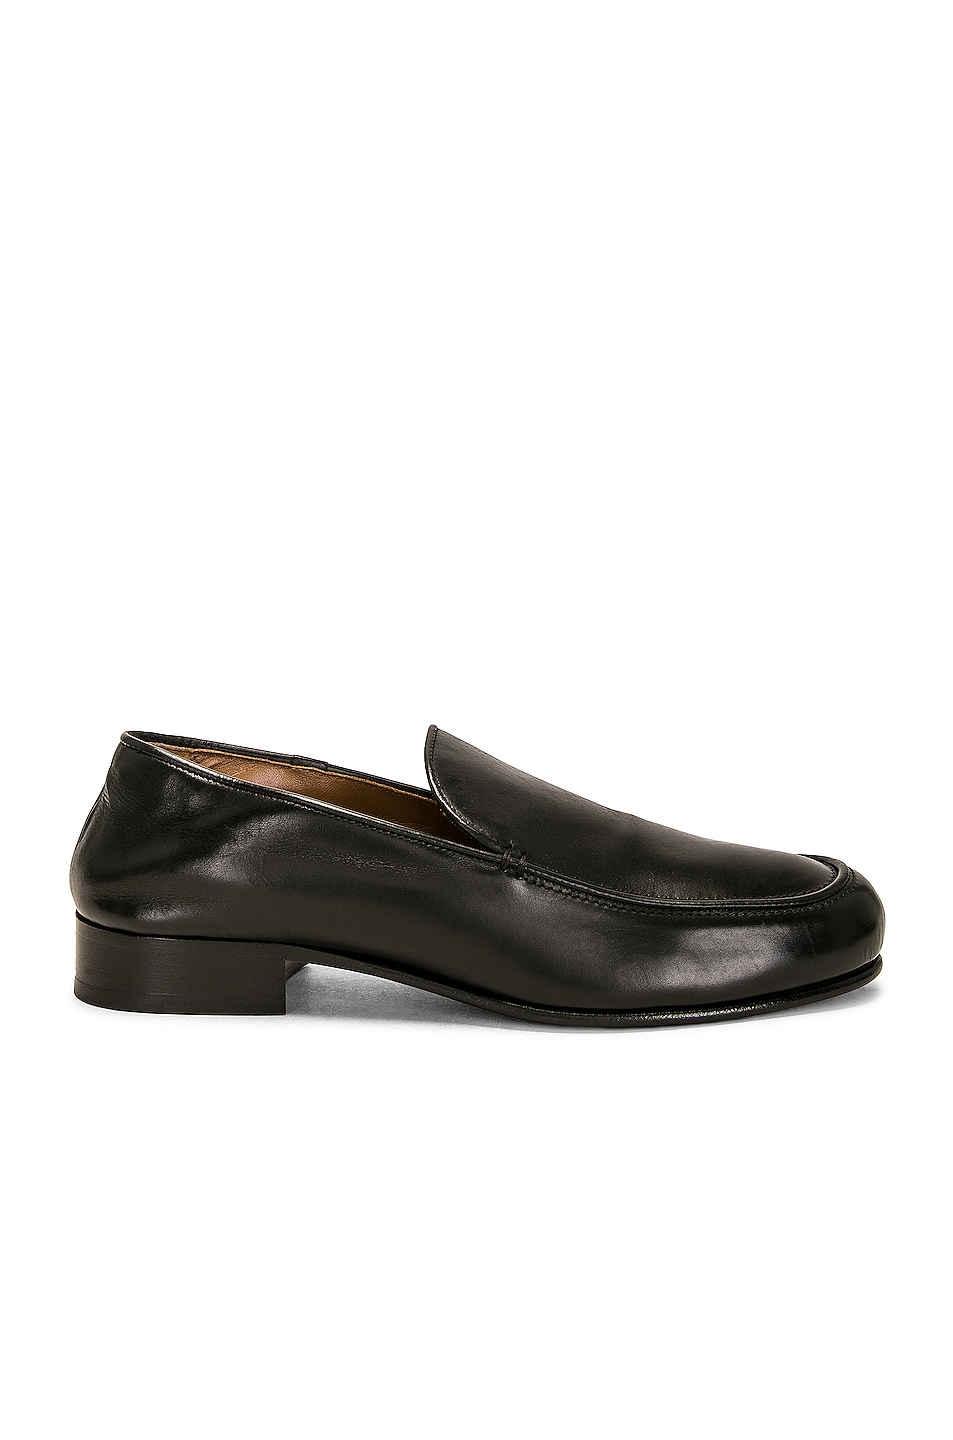 Designer Flats | Ballet Flats, Oxfords and Loafers for Women